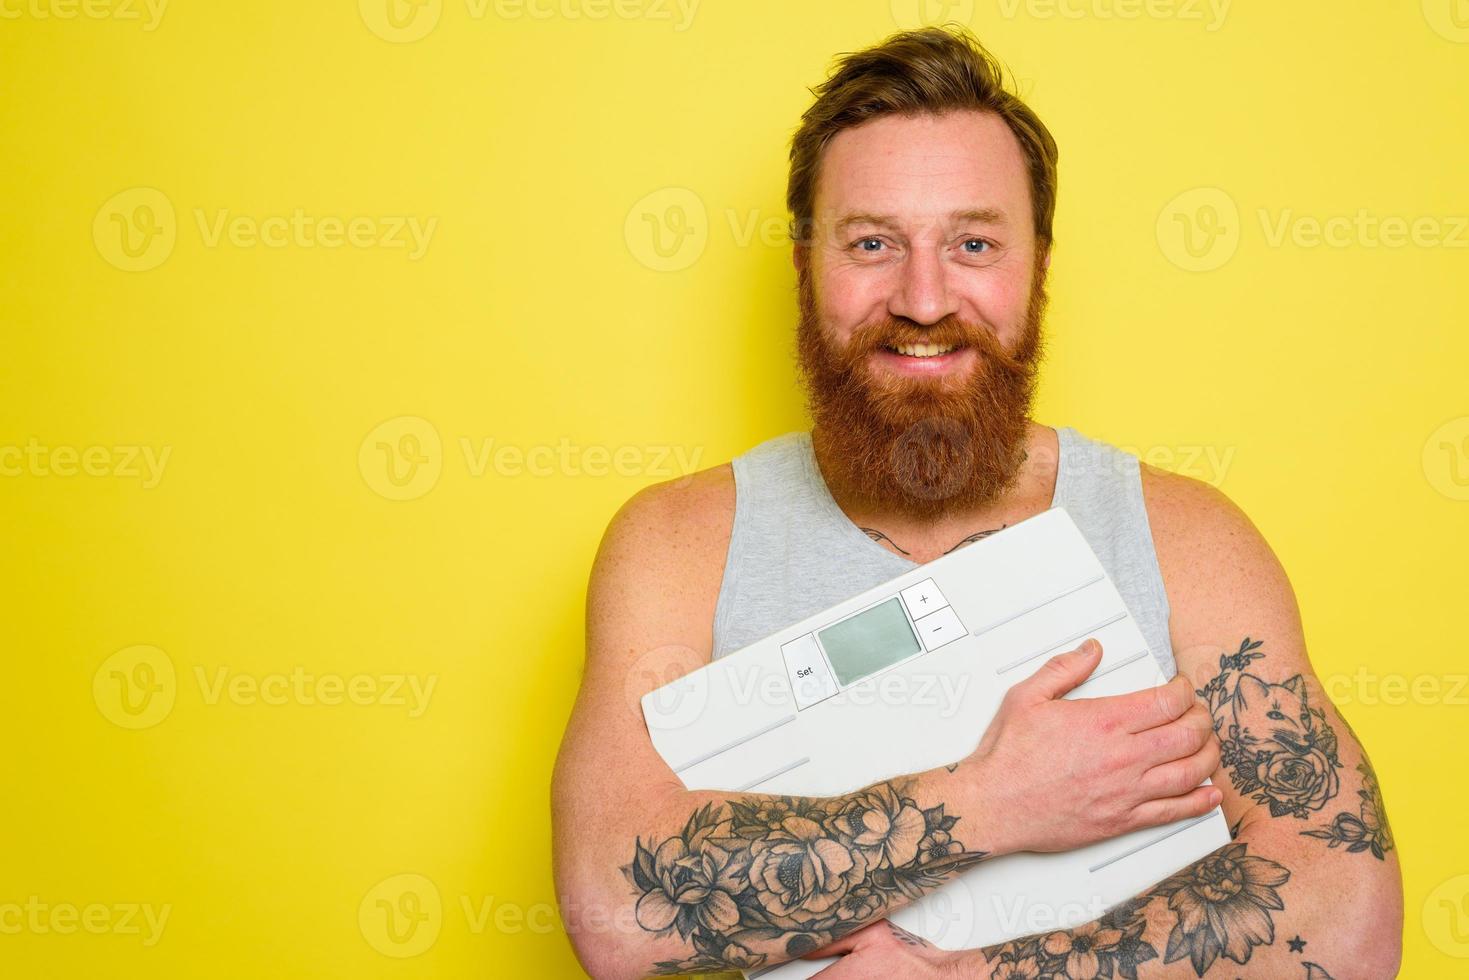 Happy man with beard and tattoos holds an electronic balance photo